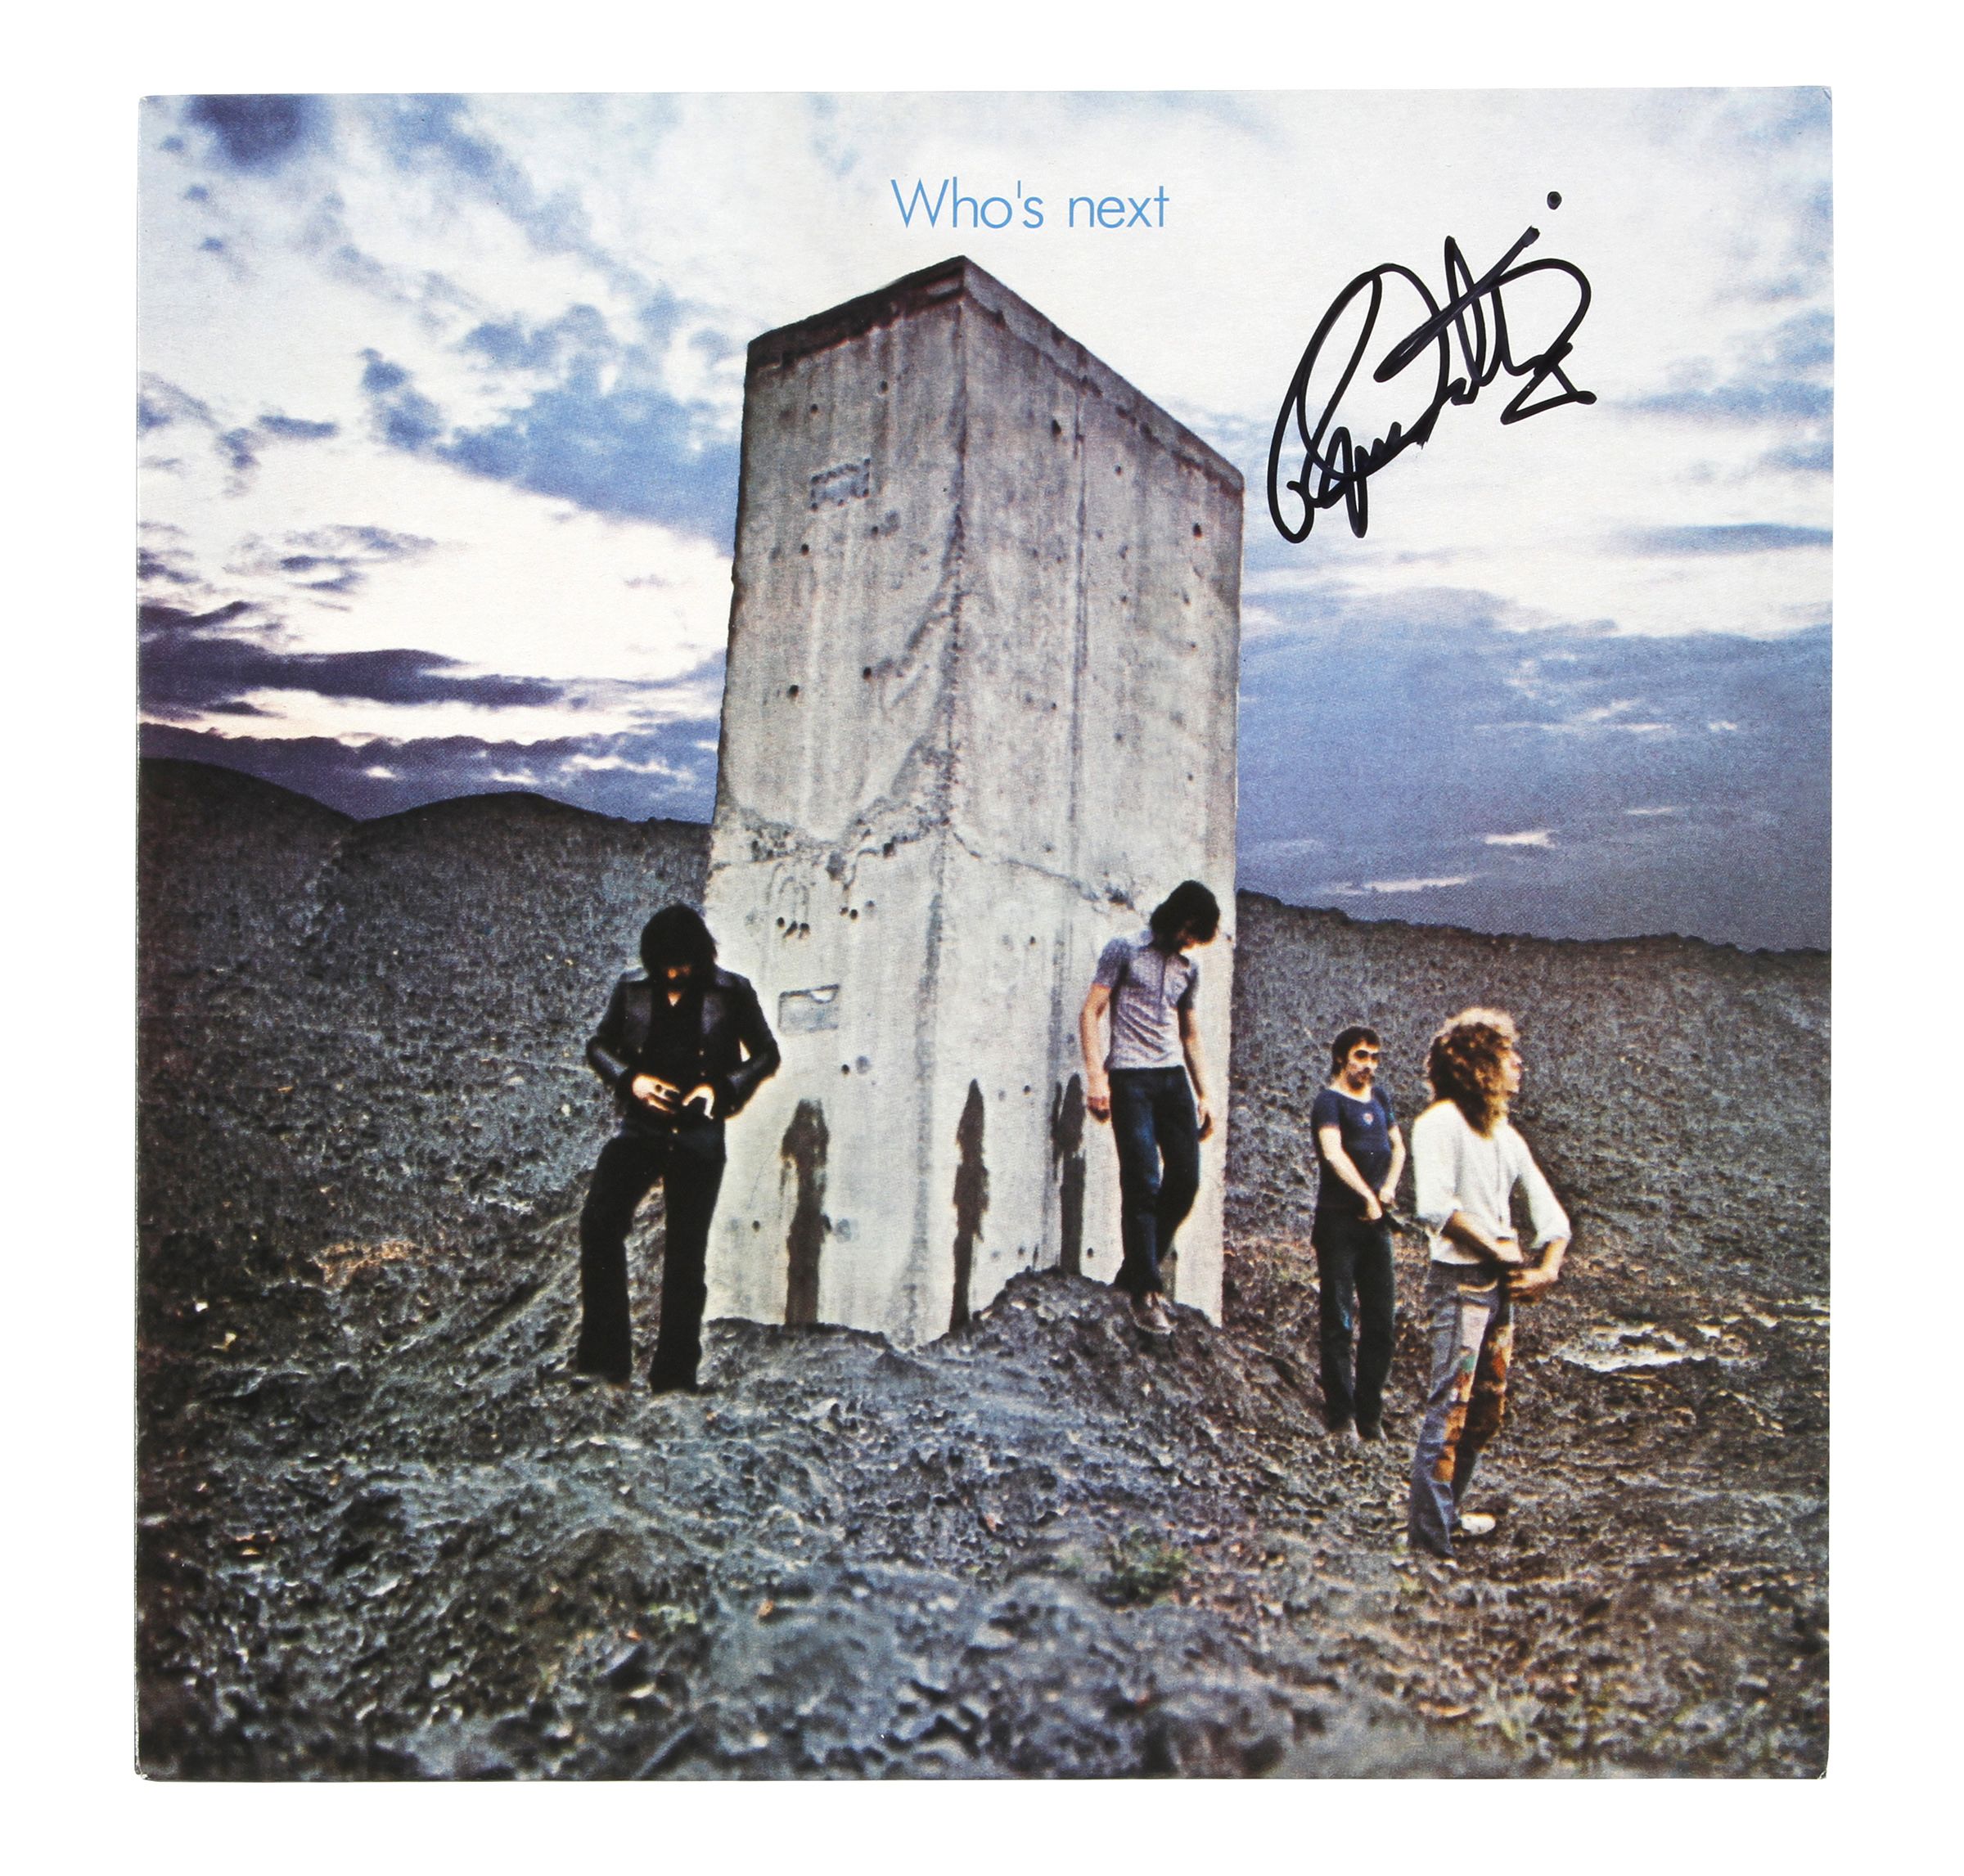 the who album covers